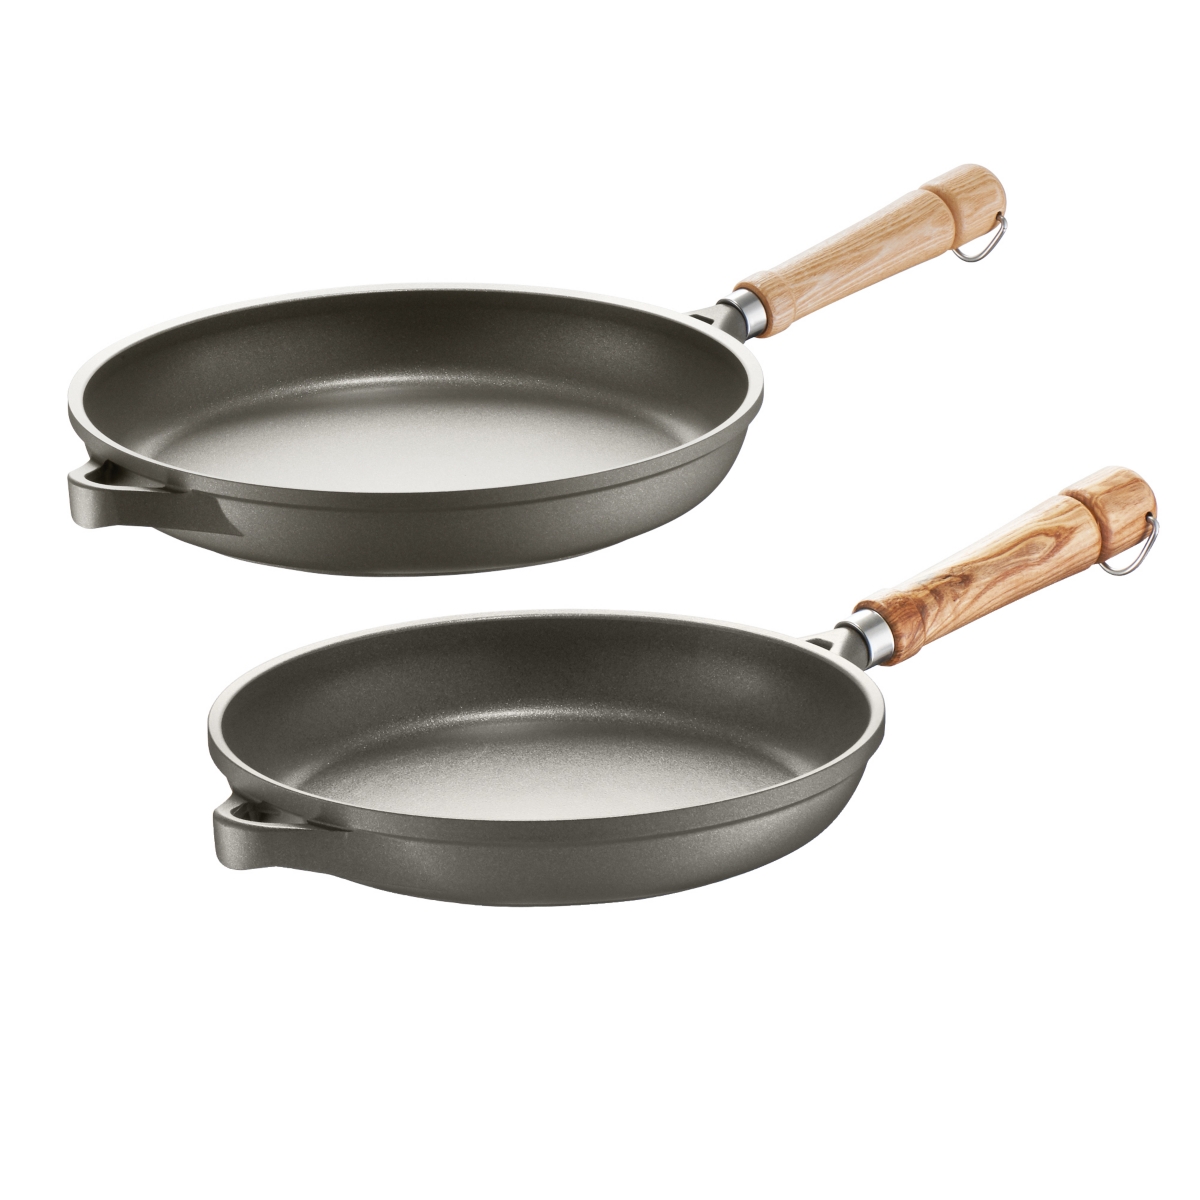 Berndes Tradition 10 and 11.5 Cast Aluminum Fry Pan Set